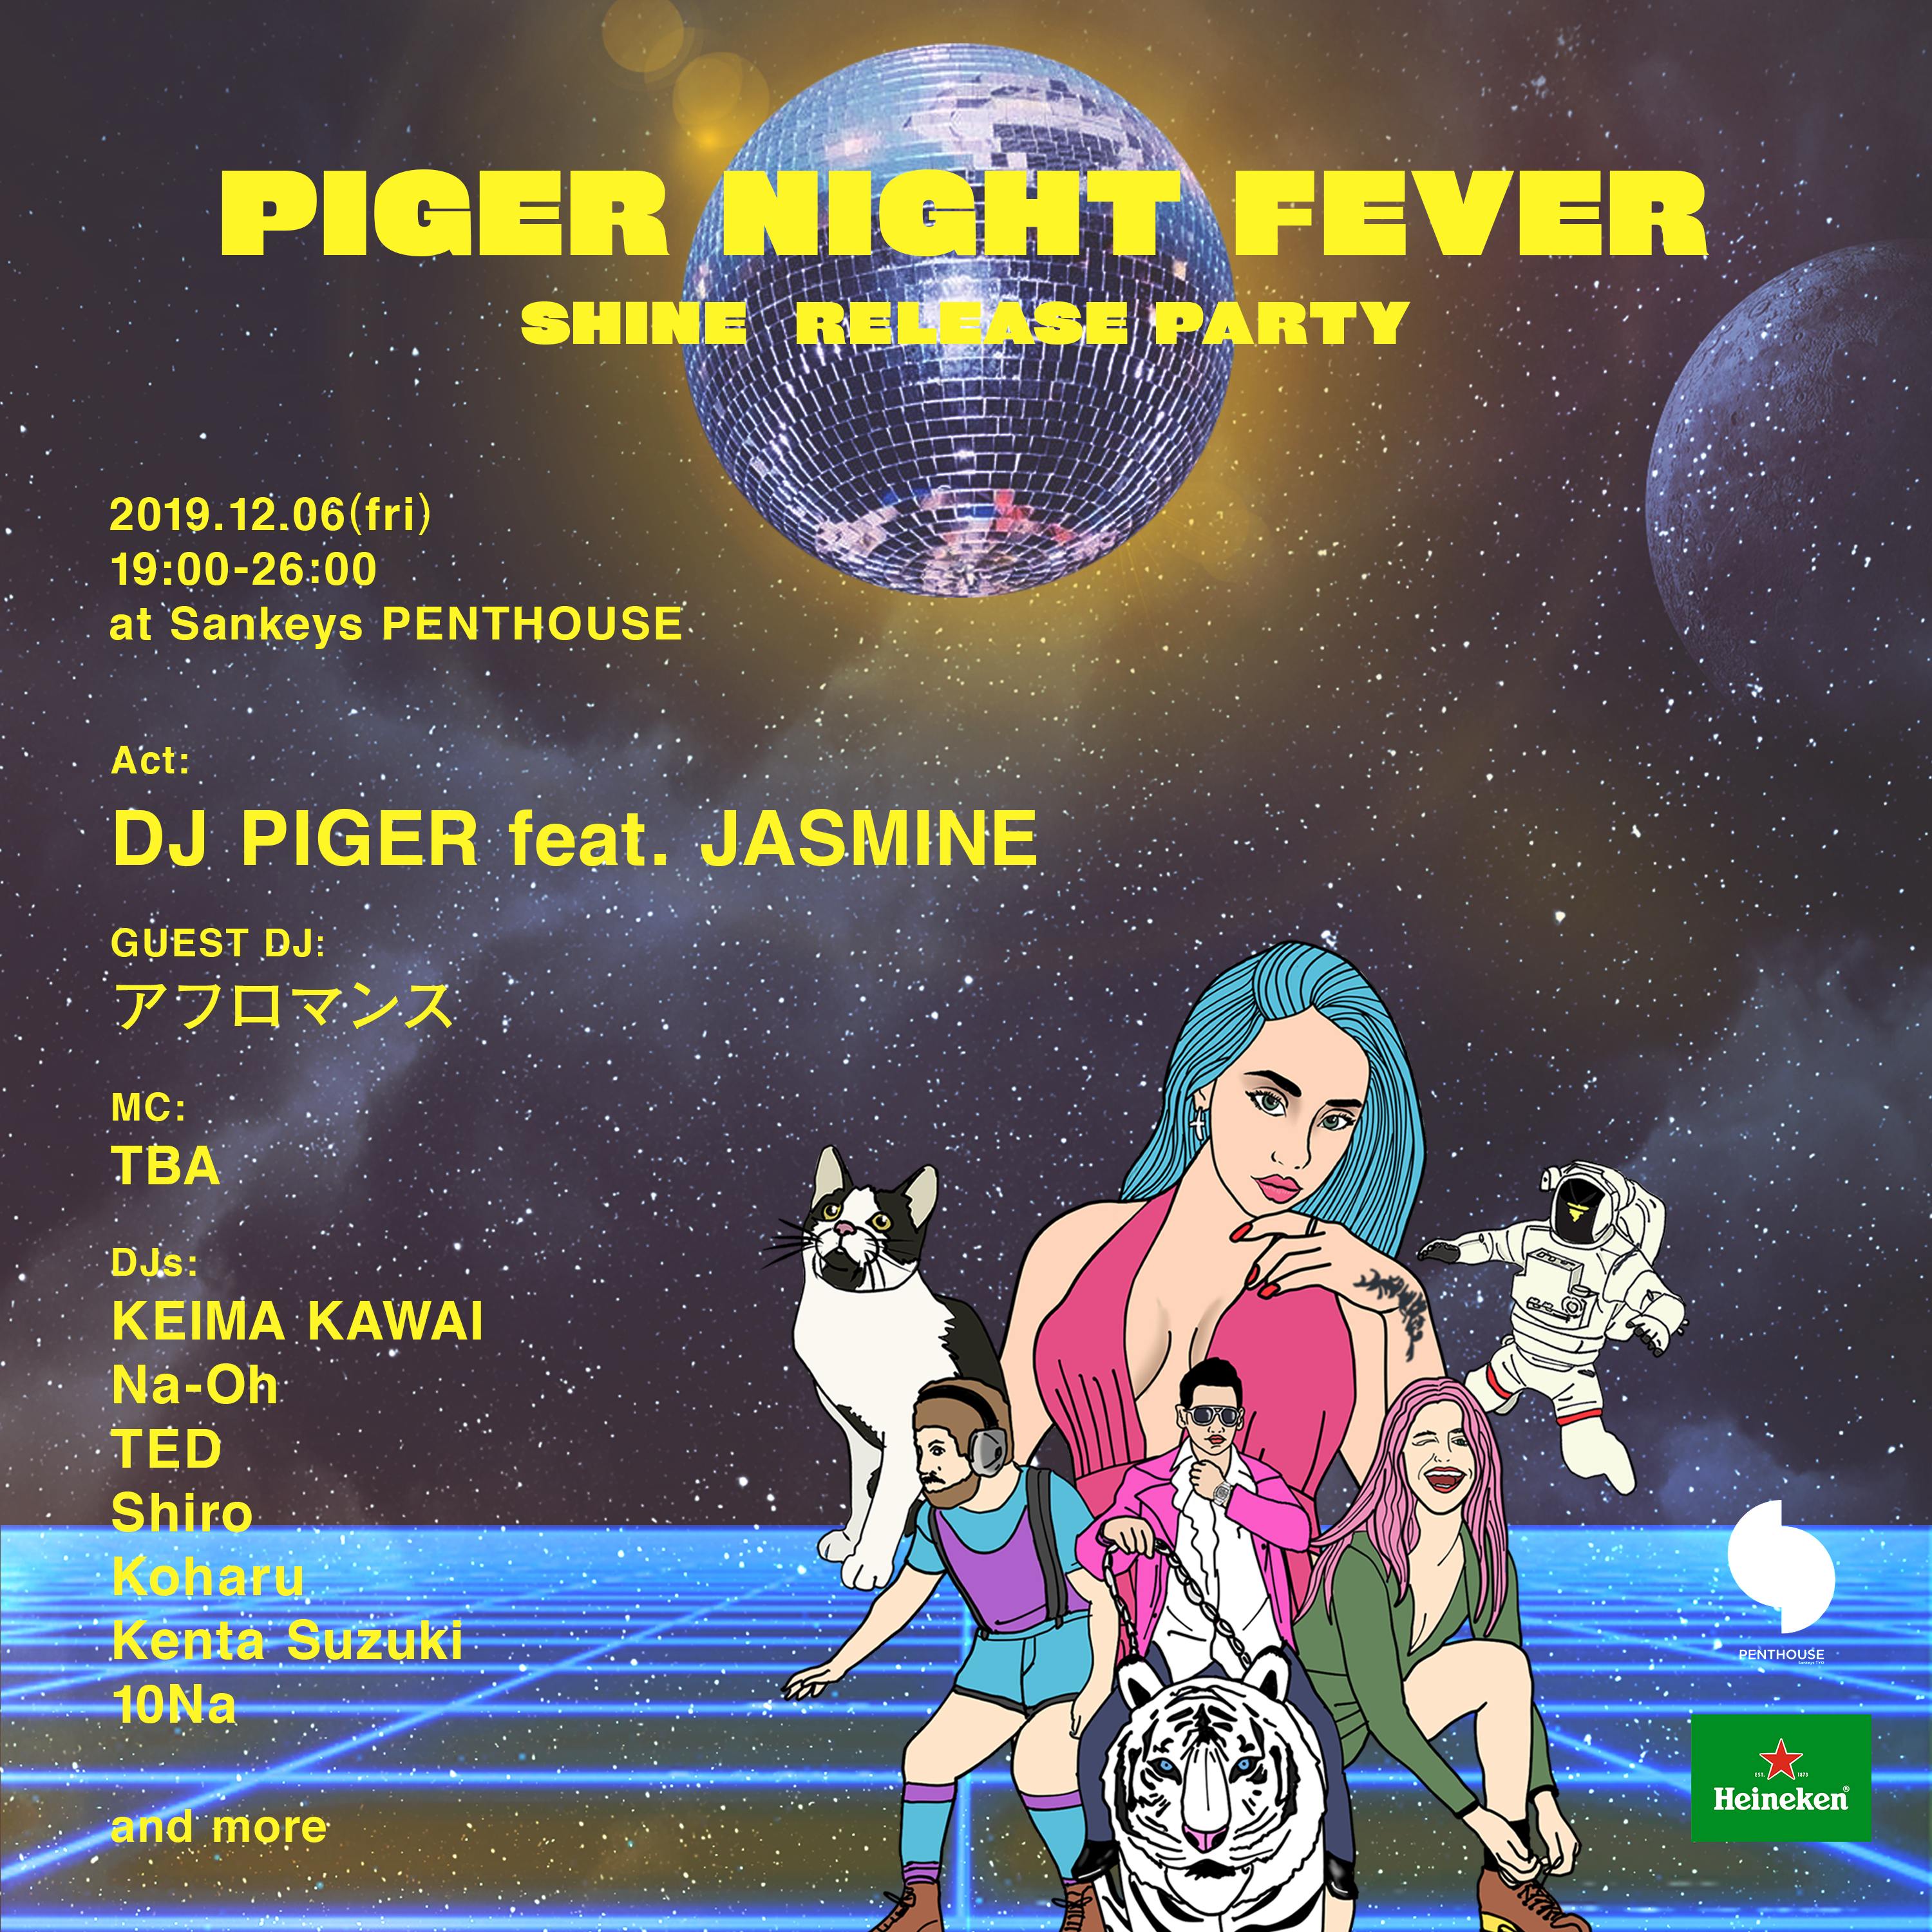 SHINE RELEASE PARTY -PIGER NIGHT FEVER-